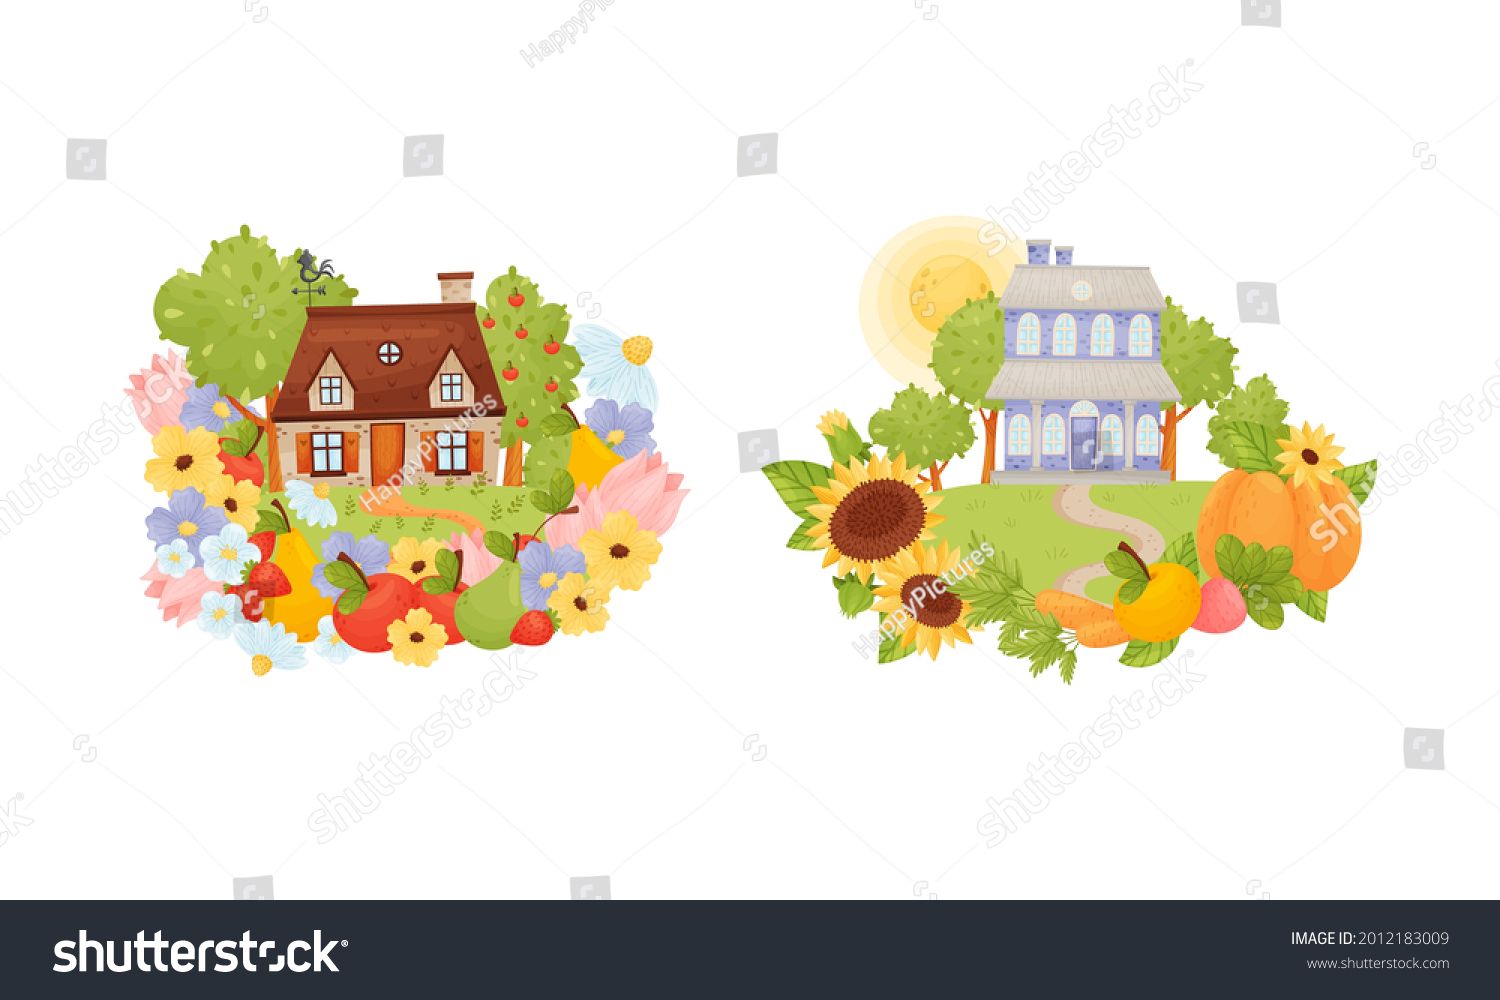 SVG of Village Houses Standing on Meadow with Winding Path Surrounded by Circular Crop and Flower Arrangement Vector Set svg